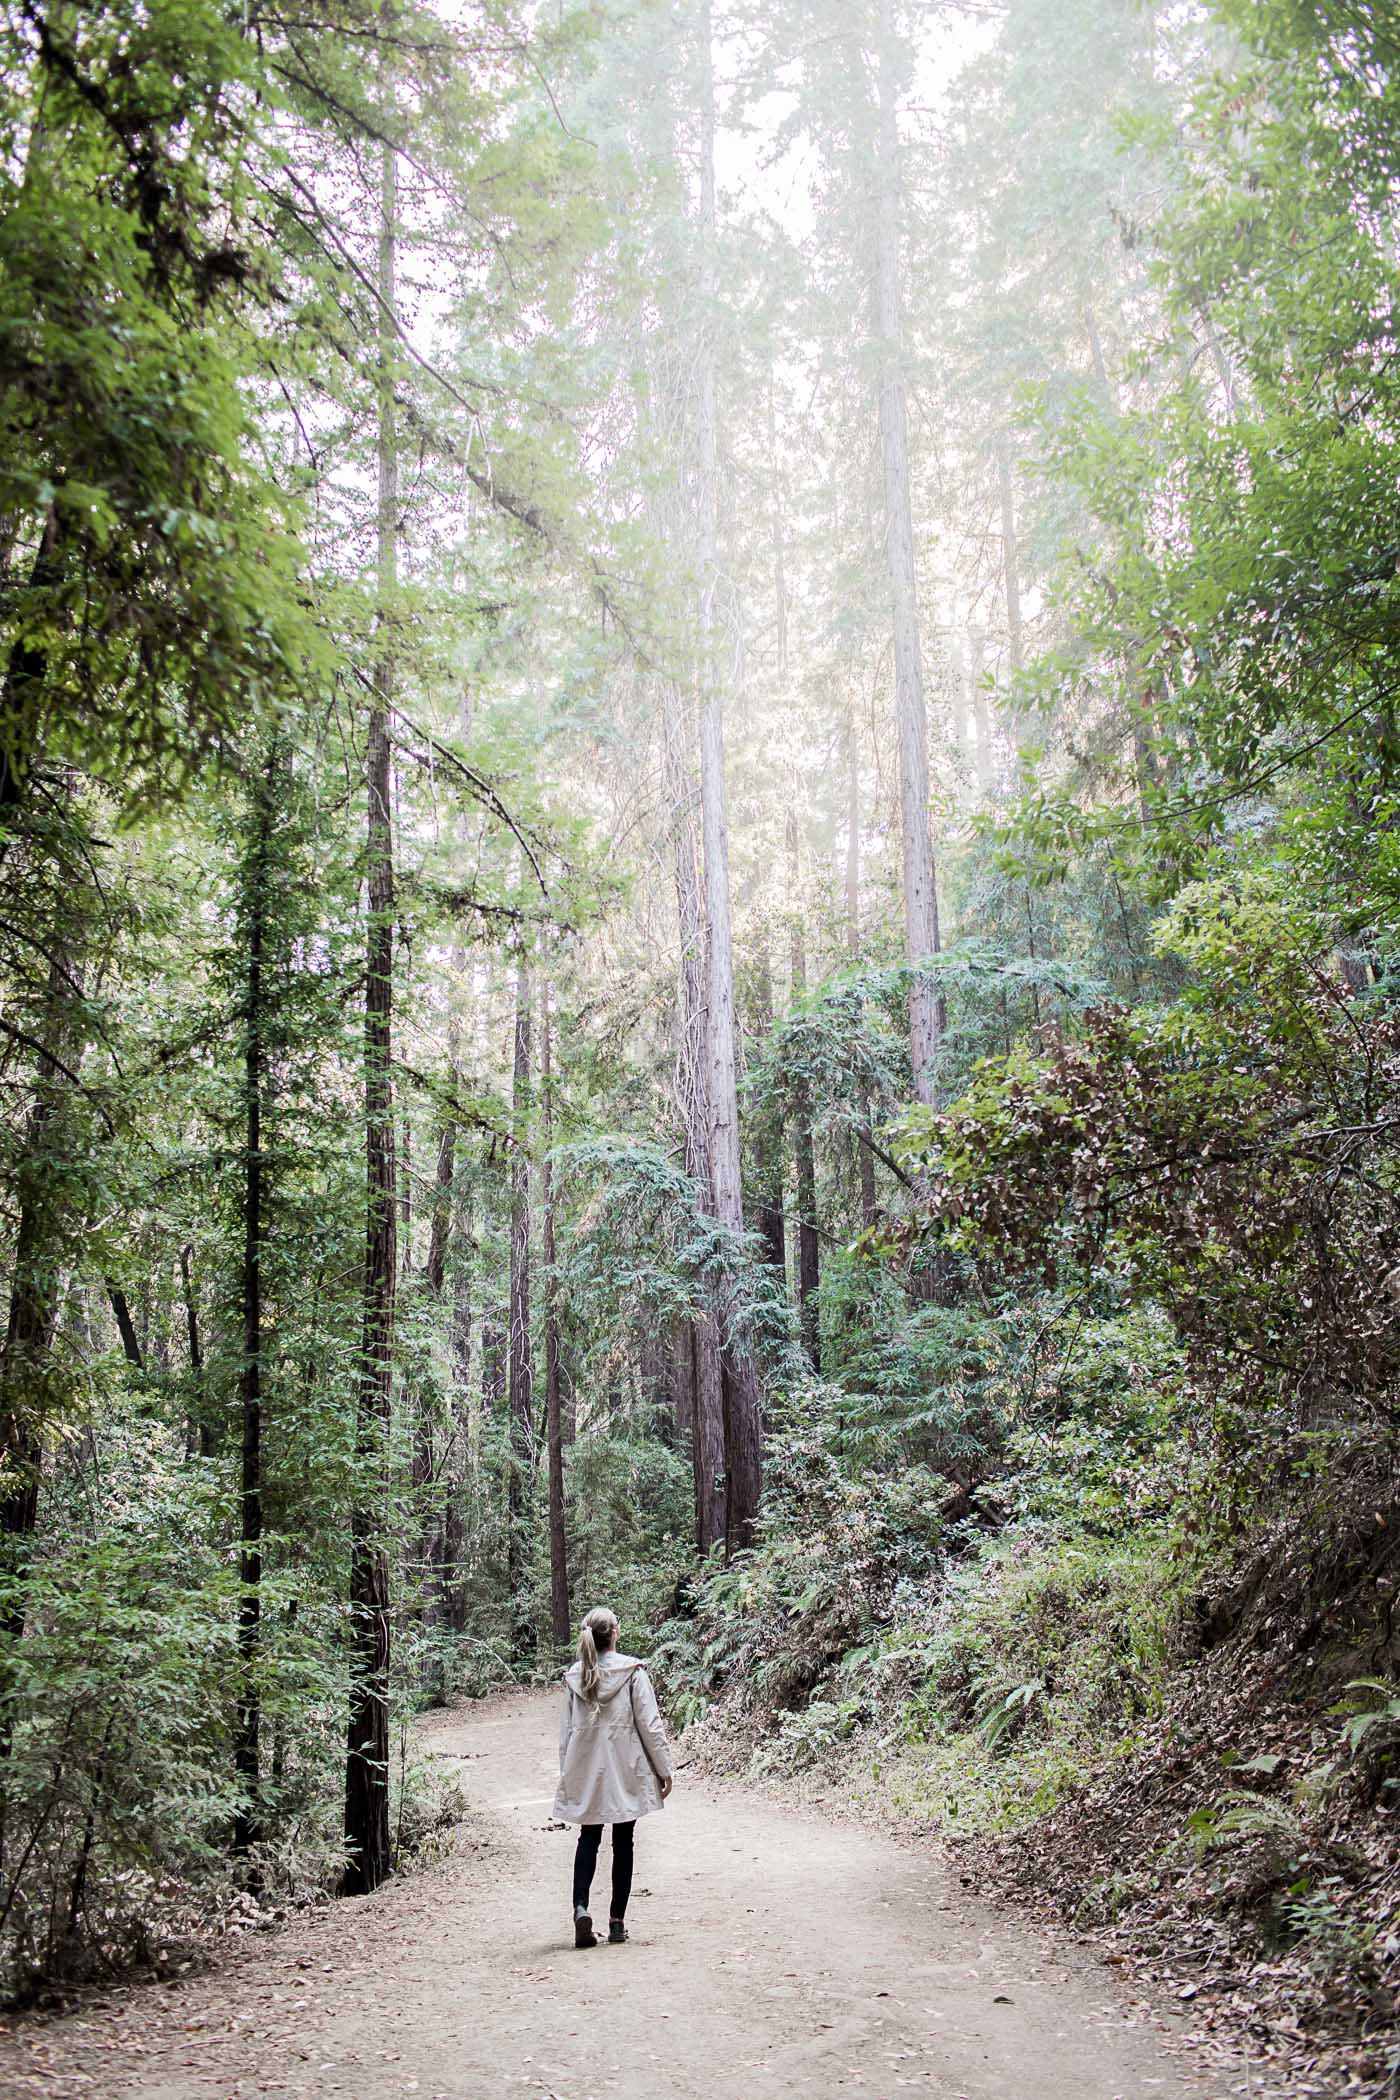 Hiking Through California at Wunderlich Park in Woodside, California.